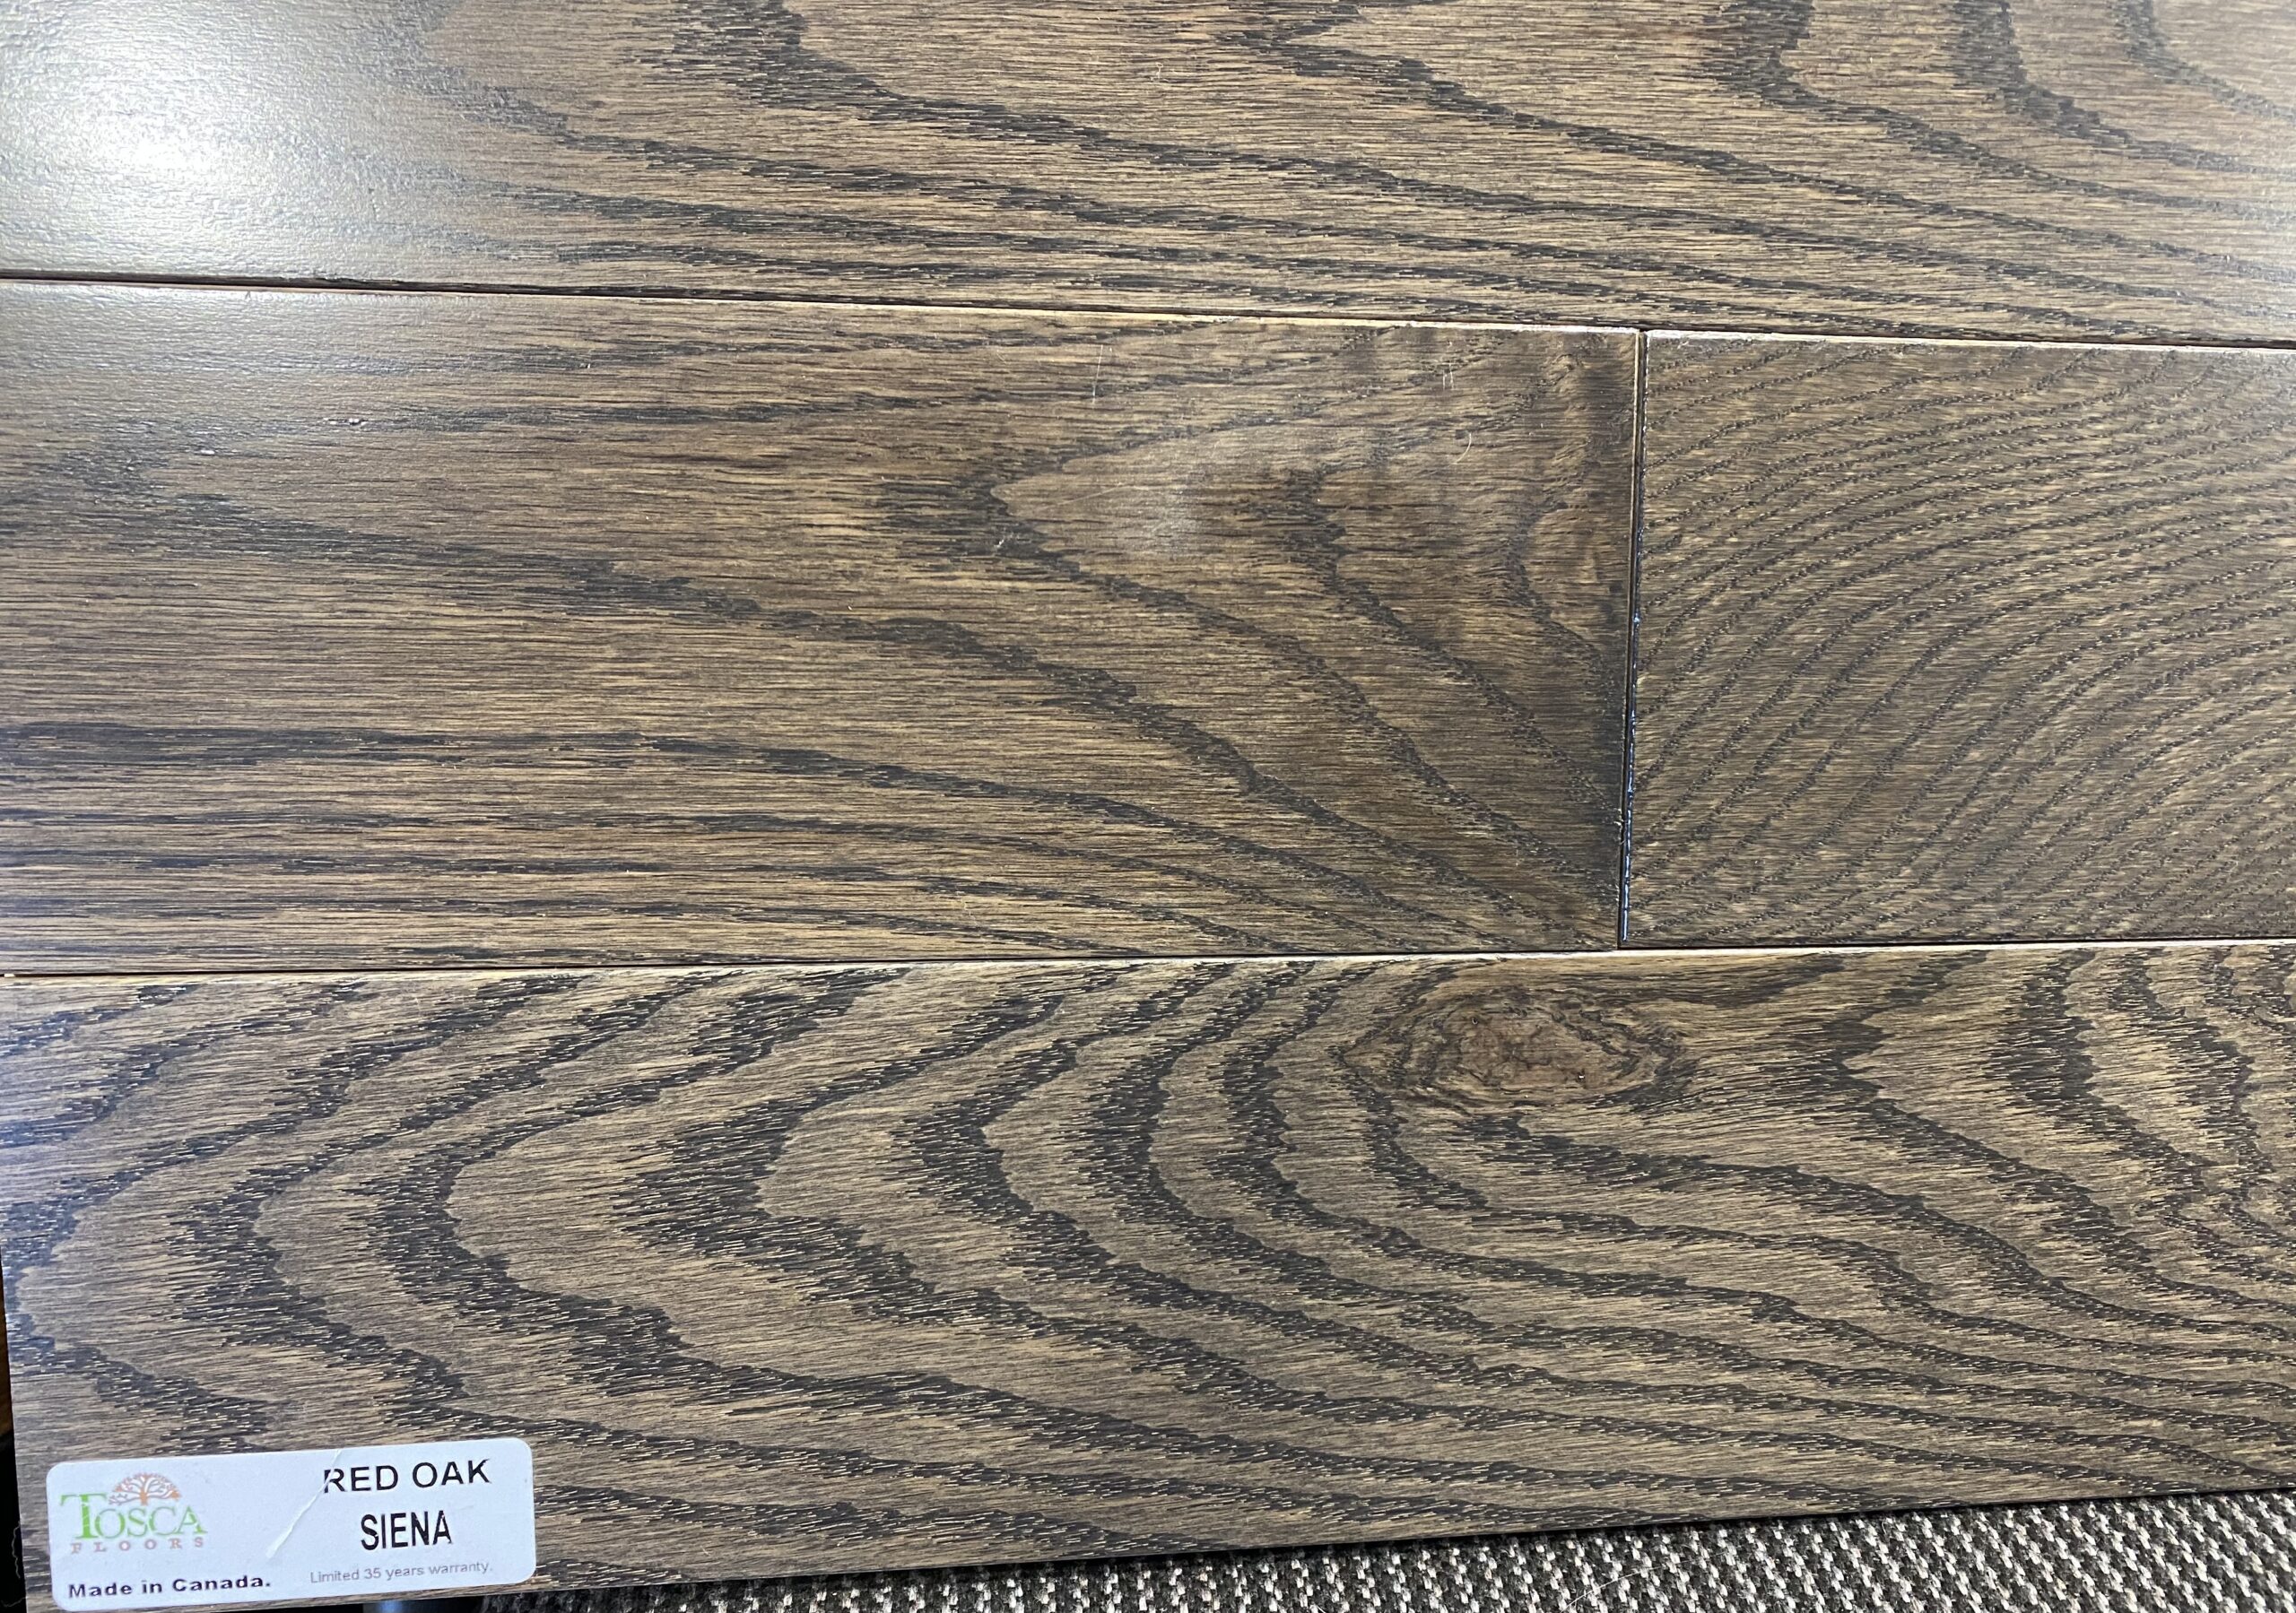 TOSCA Solid Red oak 3 ¼” AND 4 ¼” Available-   Siena